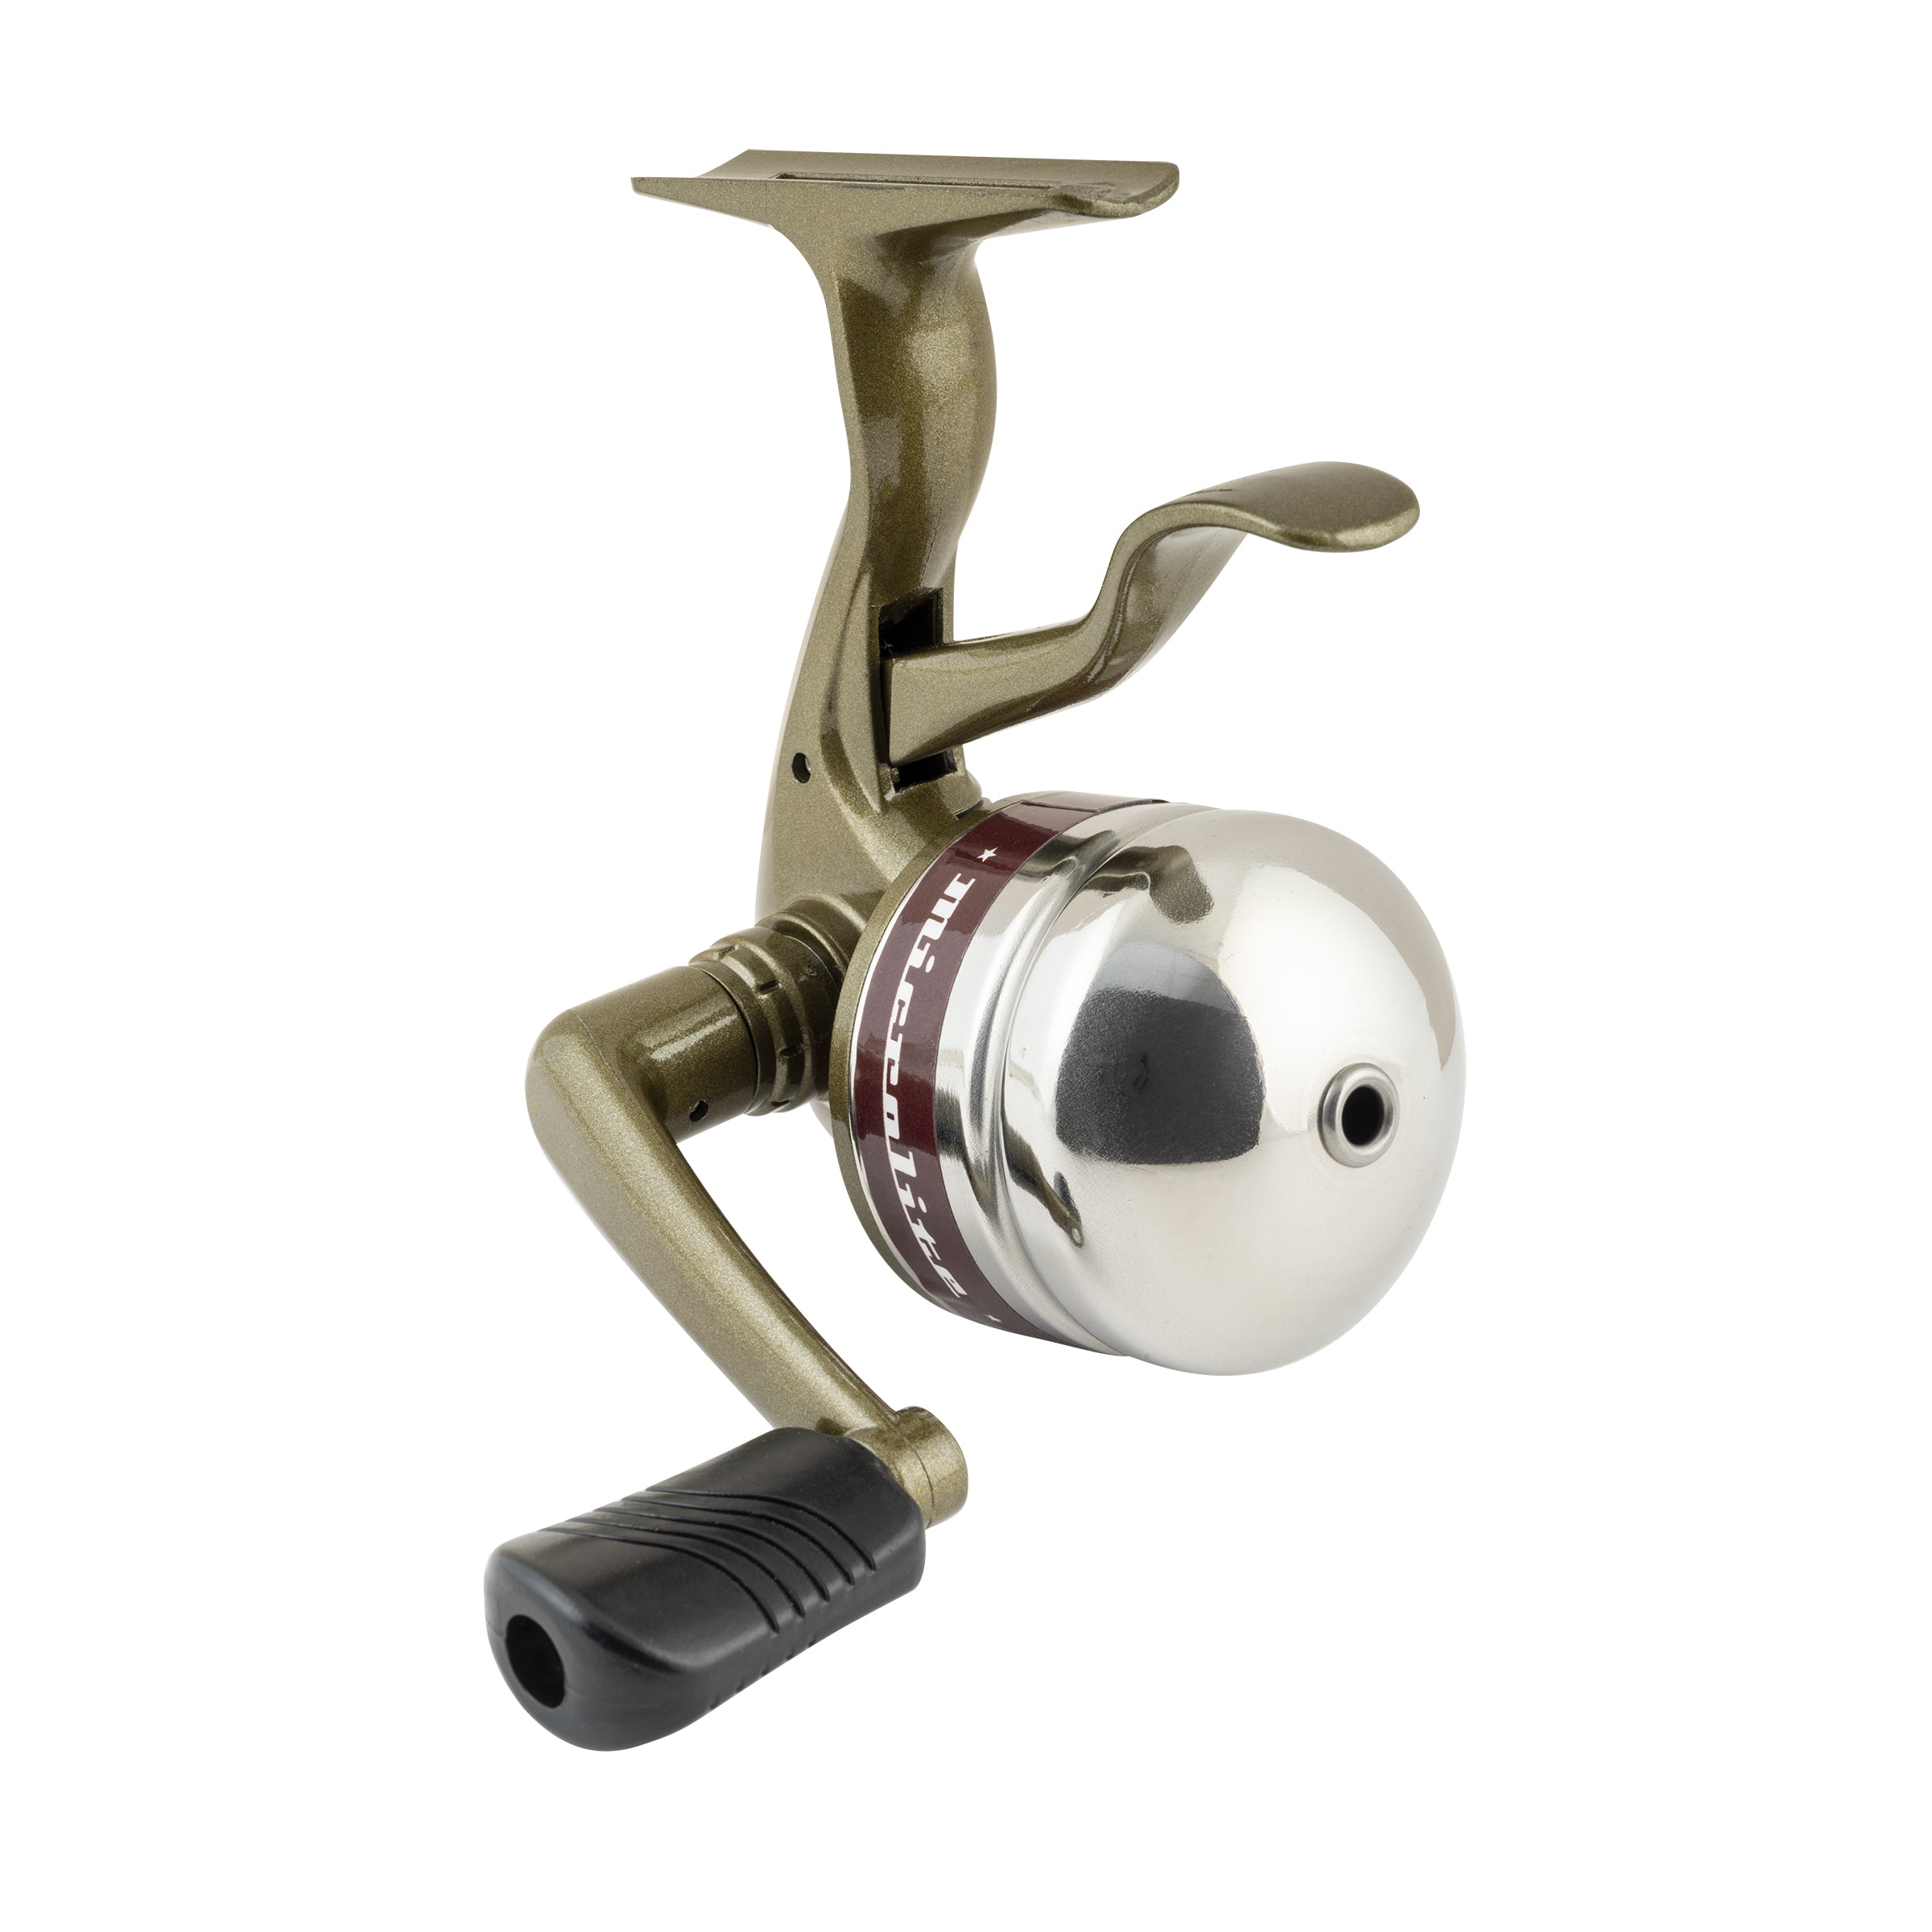 South Bend MLSP A CP Microlite Trigger Spincast Reel